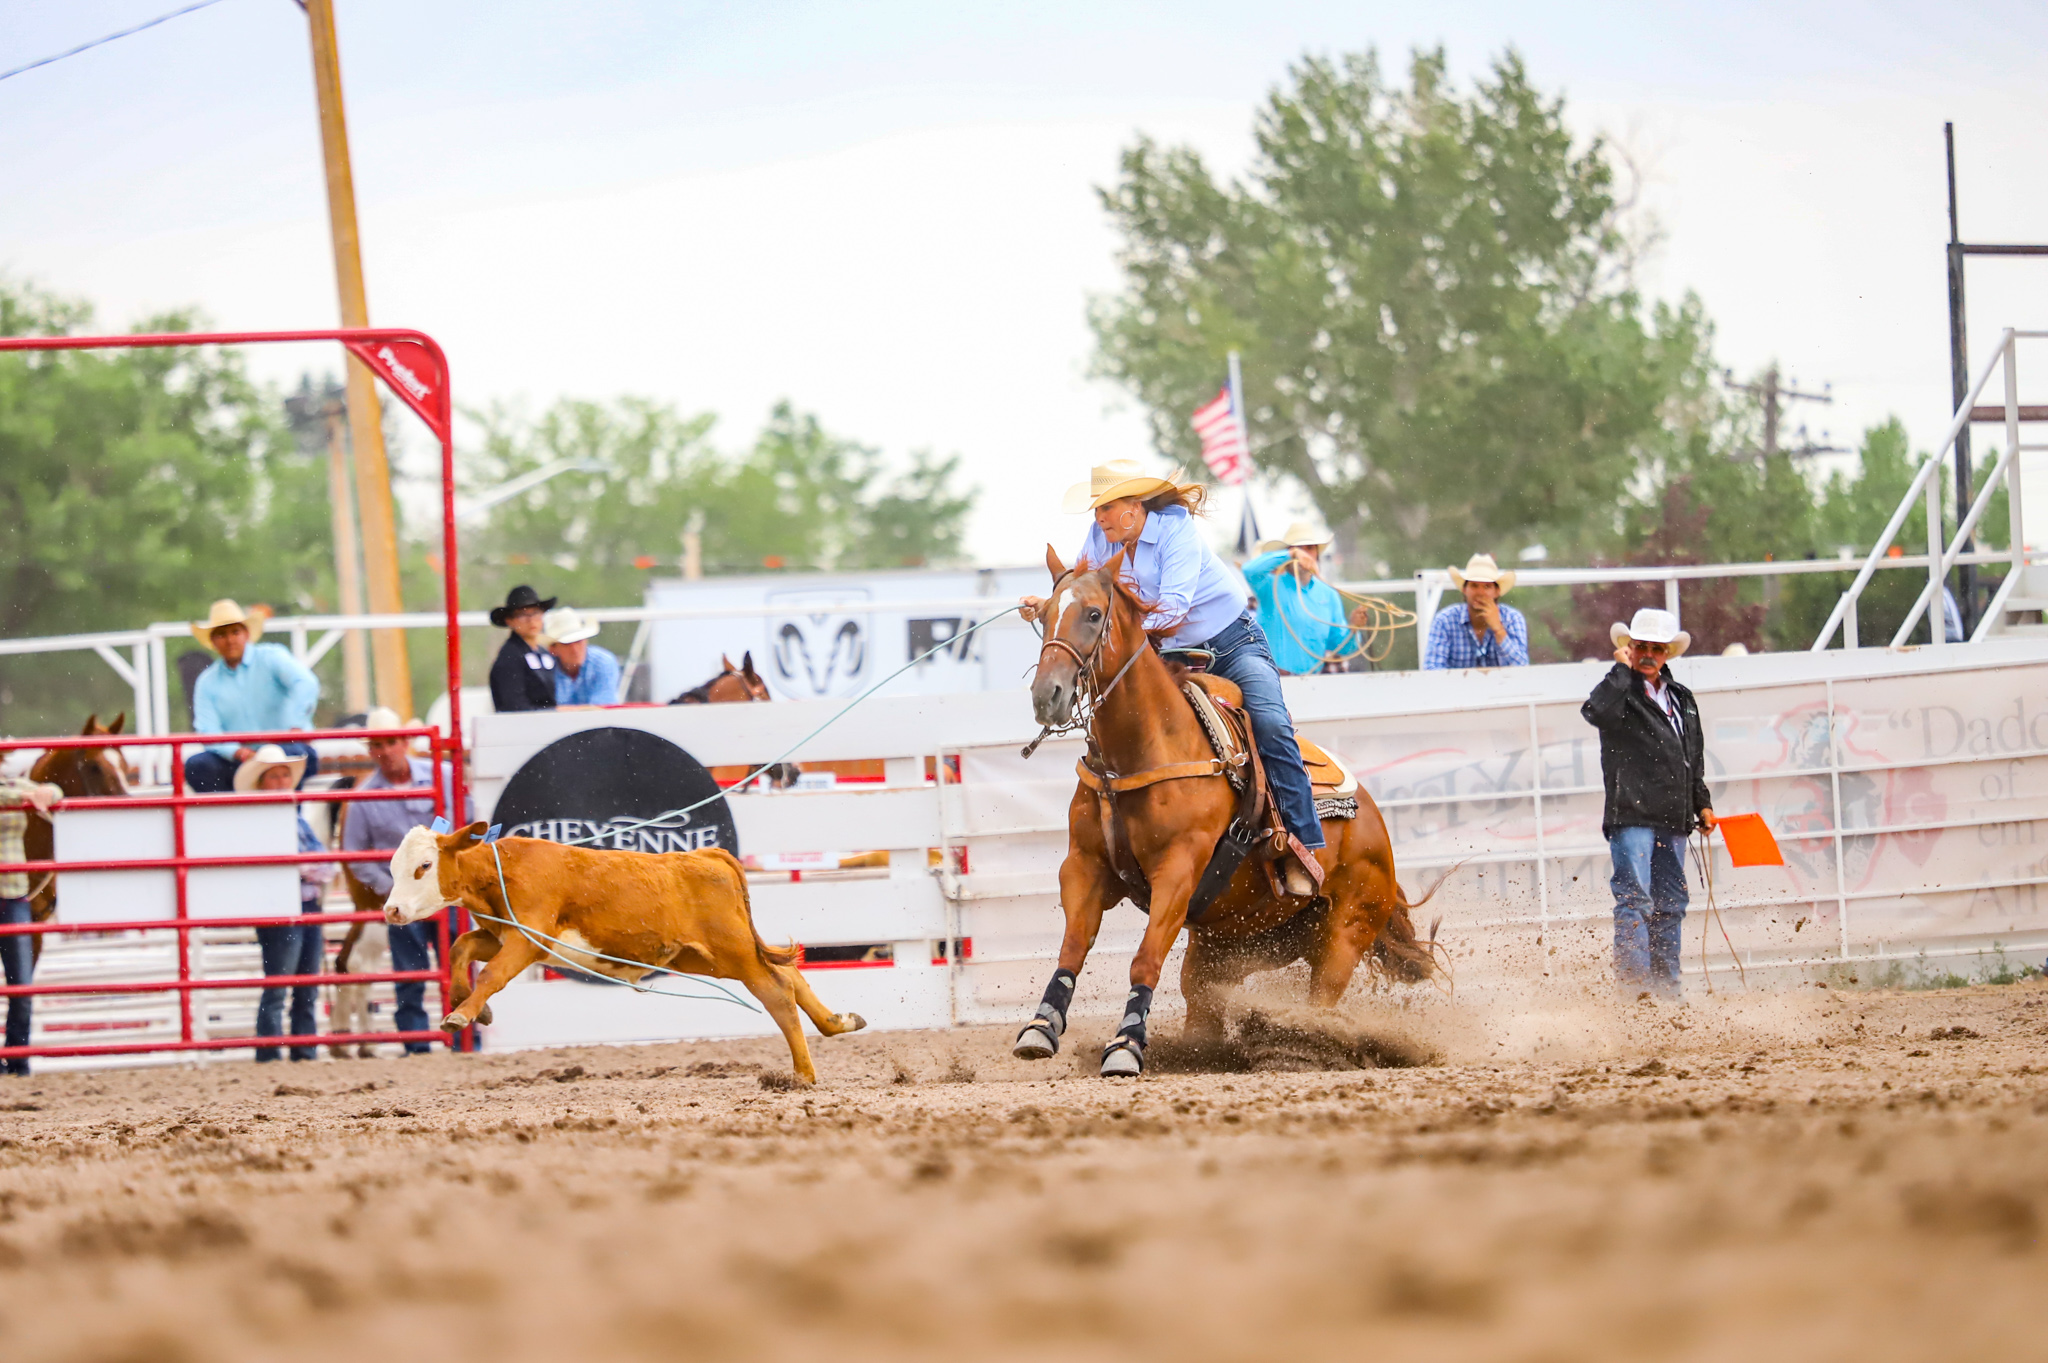 Results from Cheyenne Frontier Days' *EqualMoney* Breakaway Roping